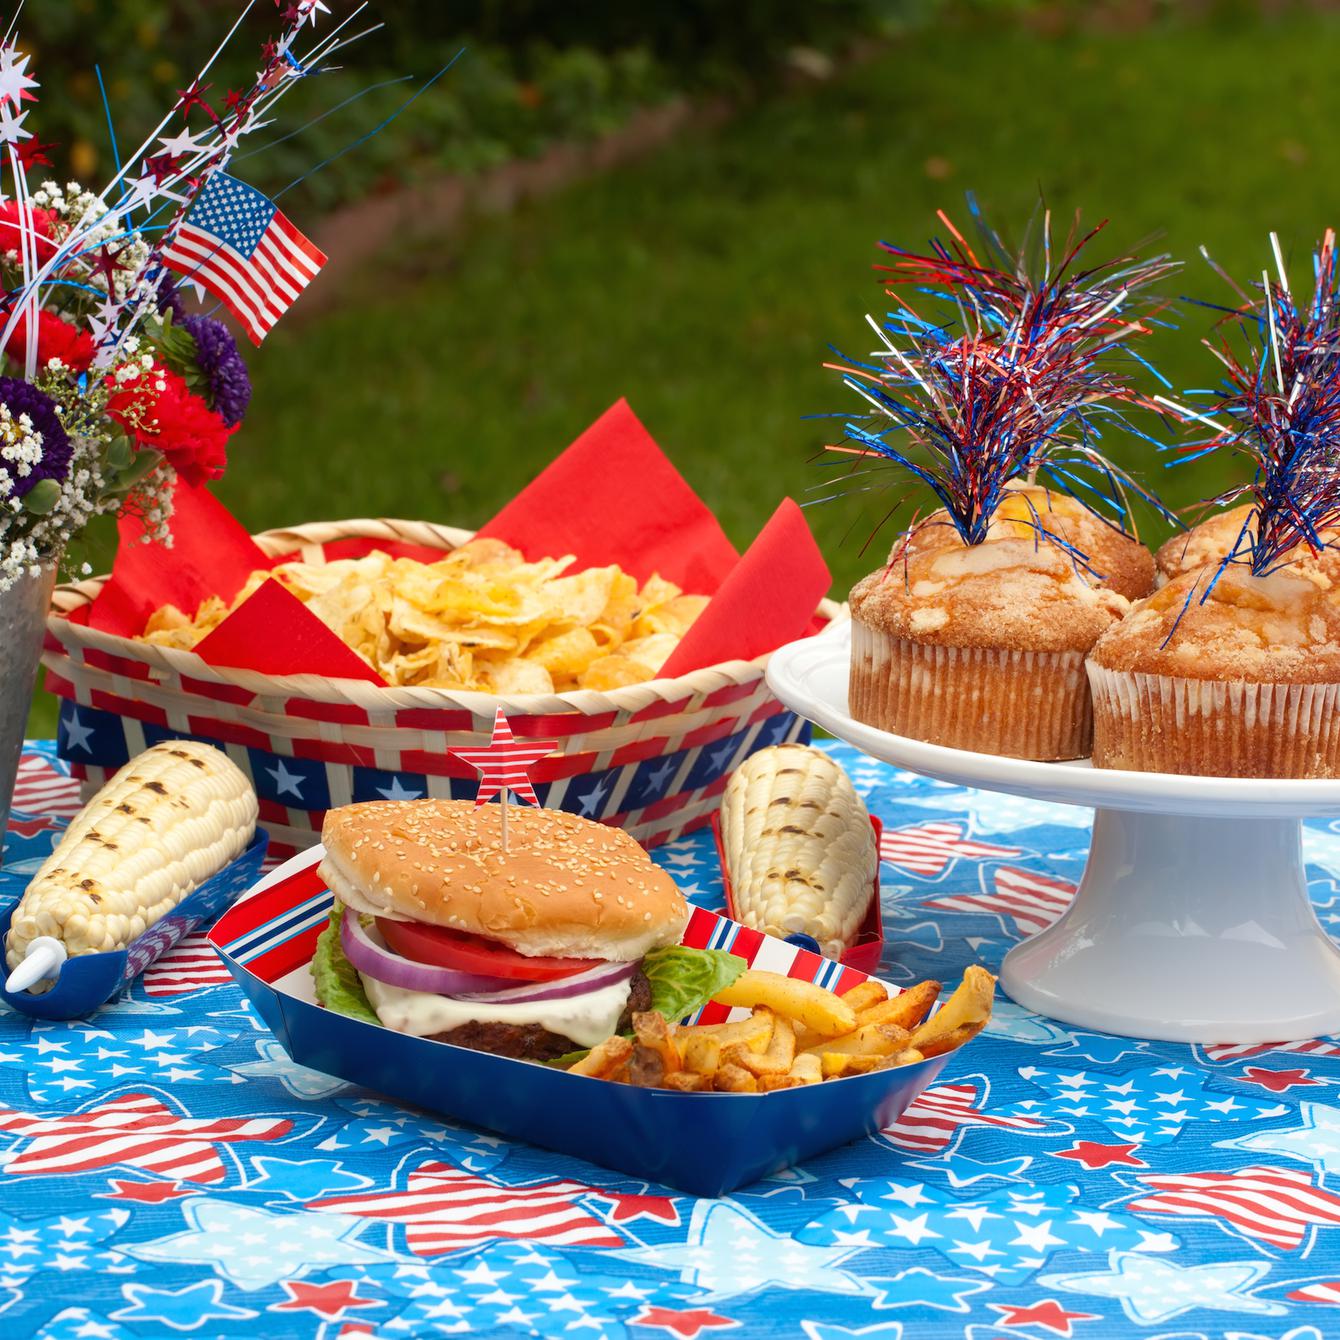 List 99+ Images what to bring to 4th of july bbq Updated